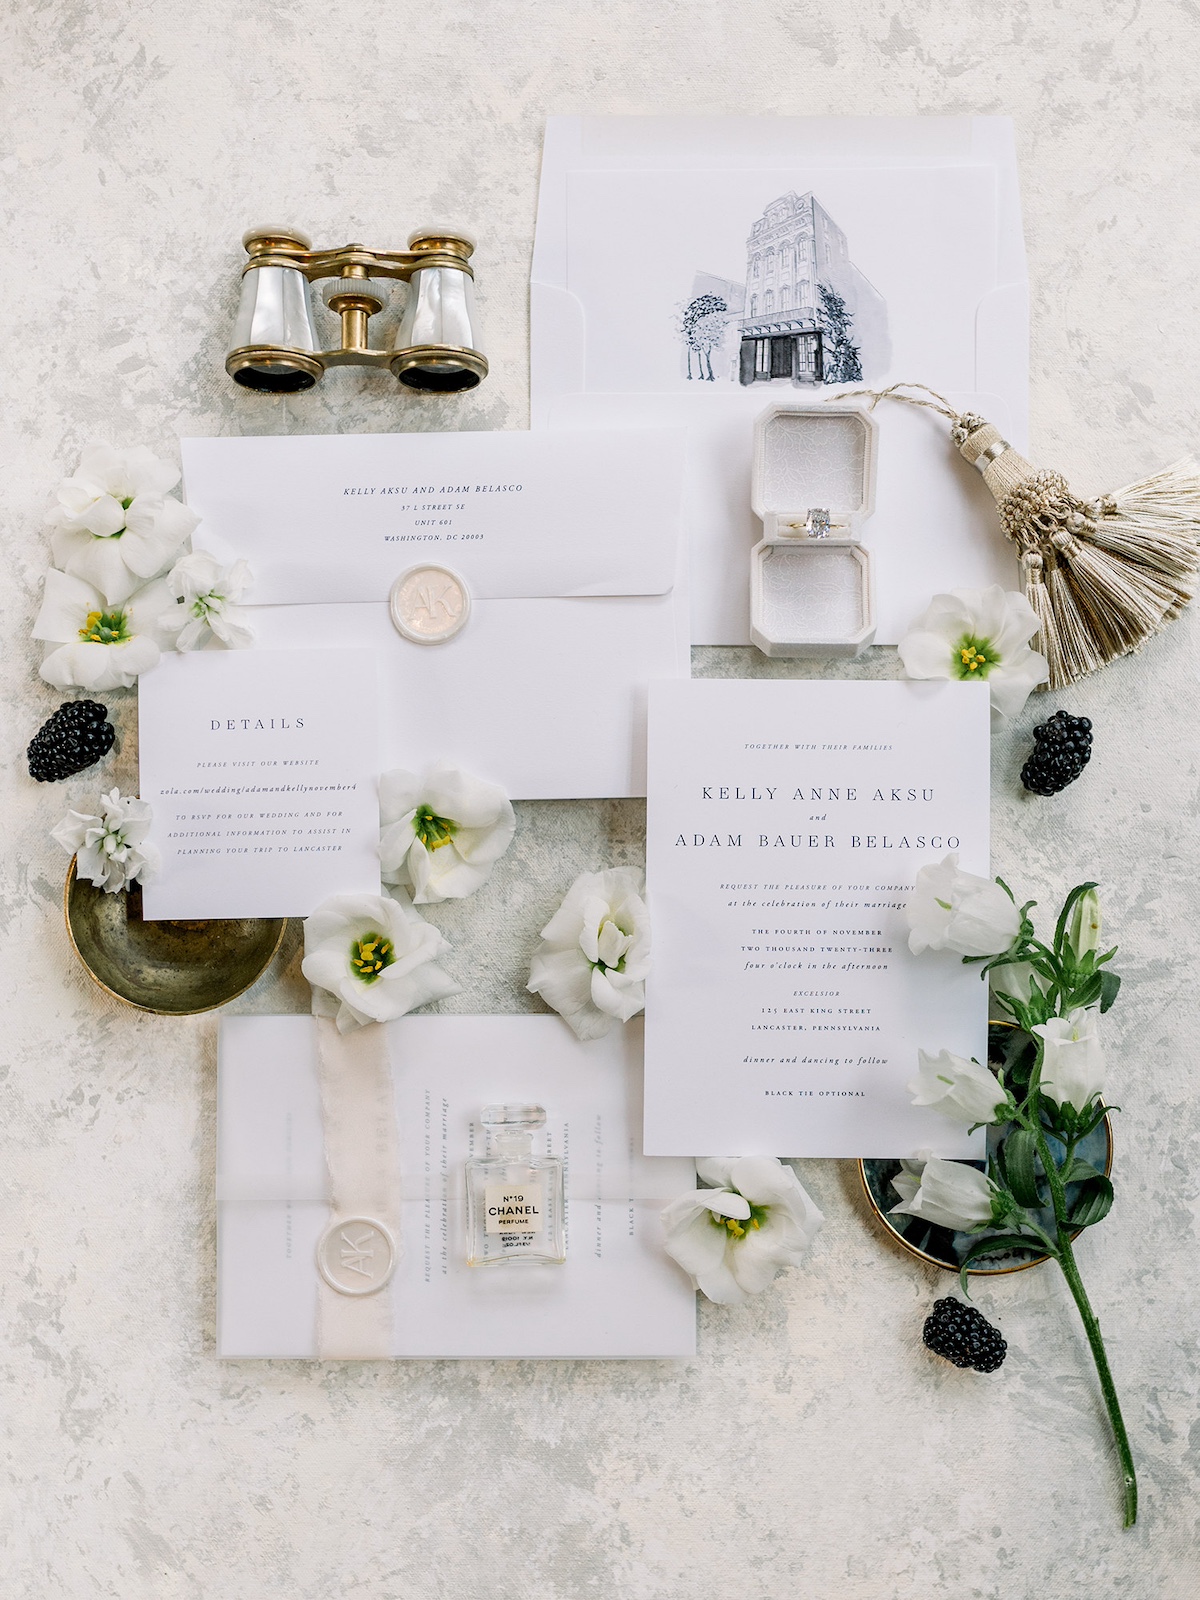 An artfully arranged flatlay capturing the details of the invitation suite, exuding classic and timeless charm.